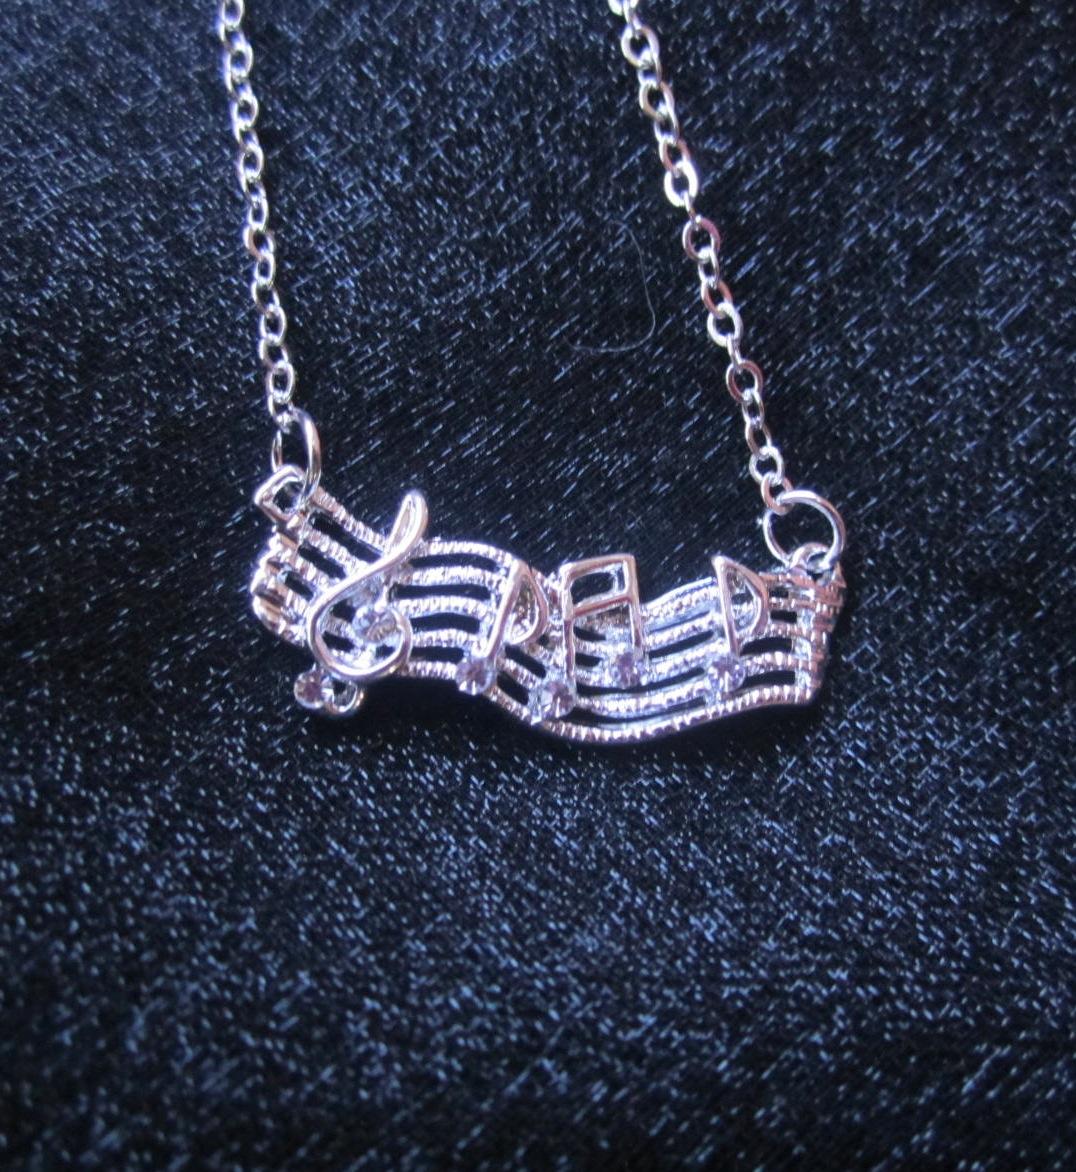 Music Notes on Wavy Staff Necklace